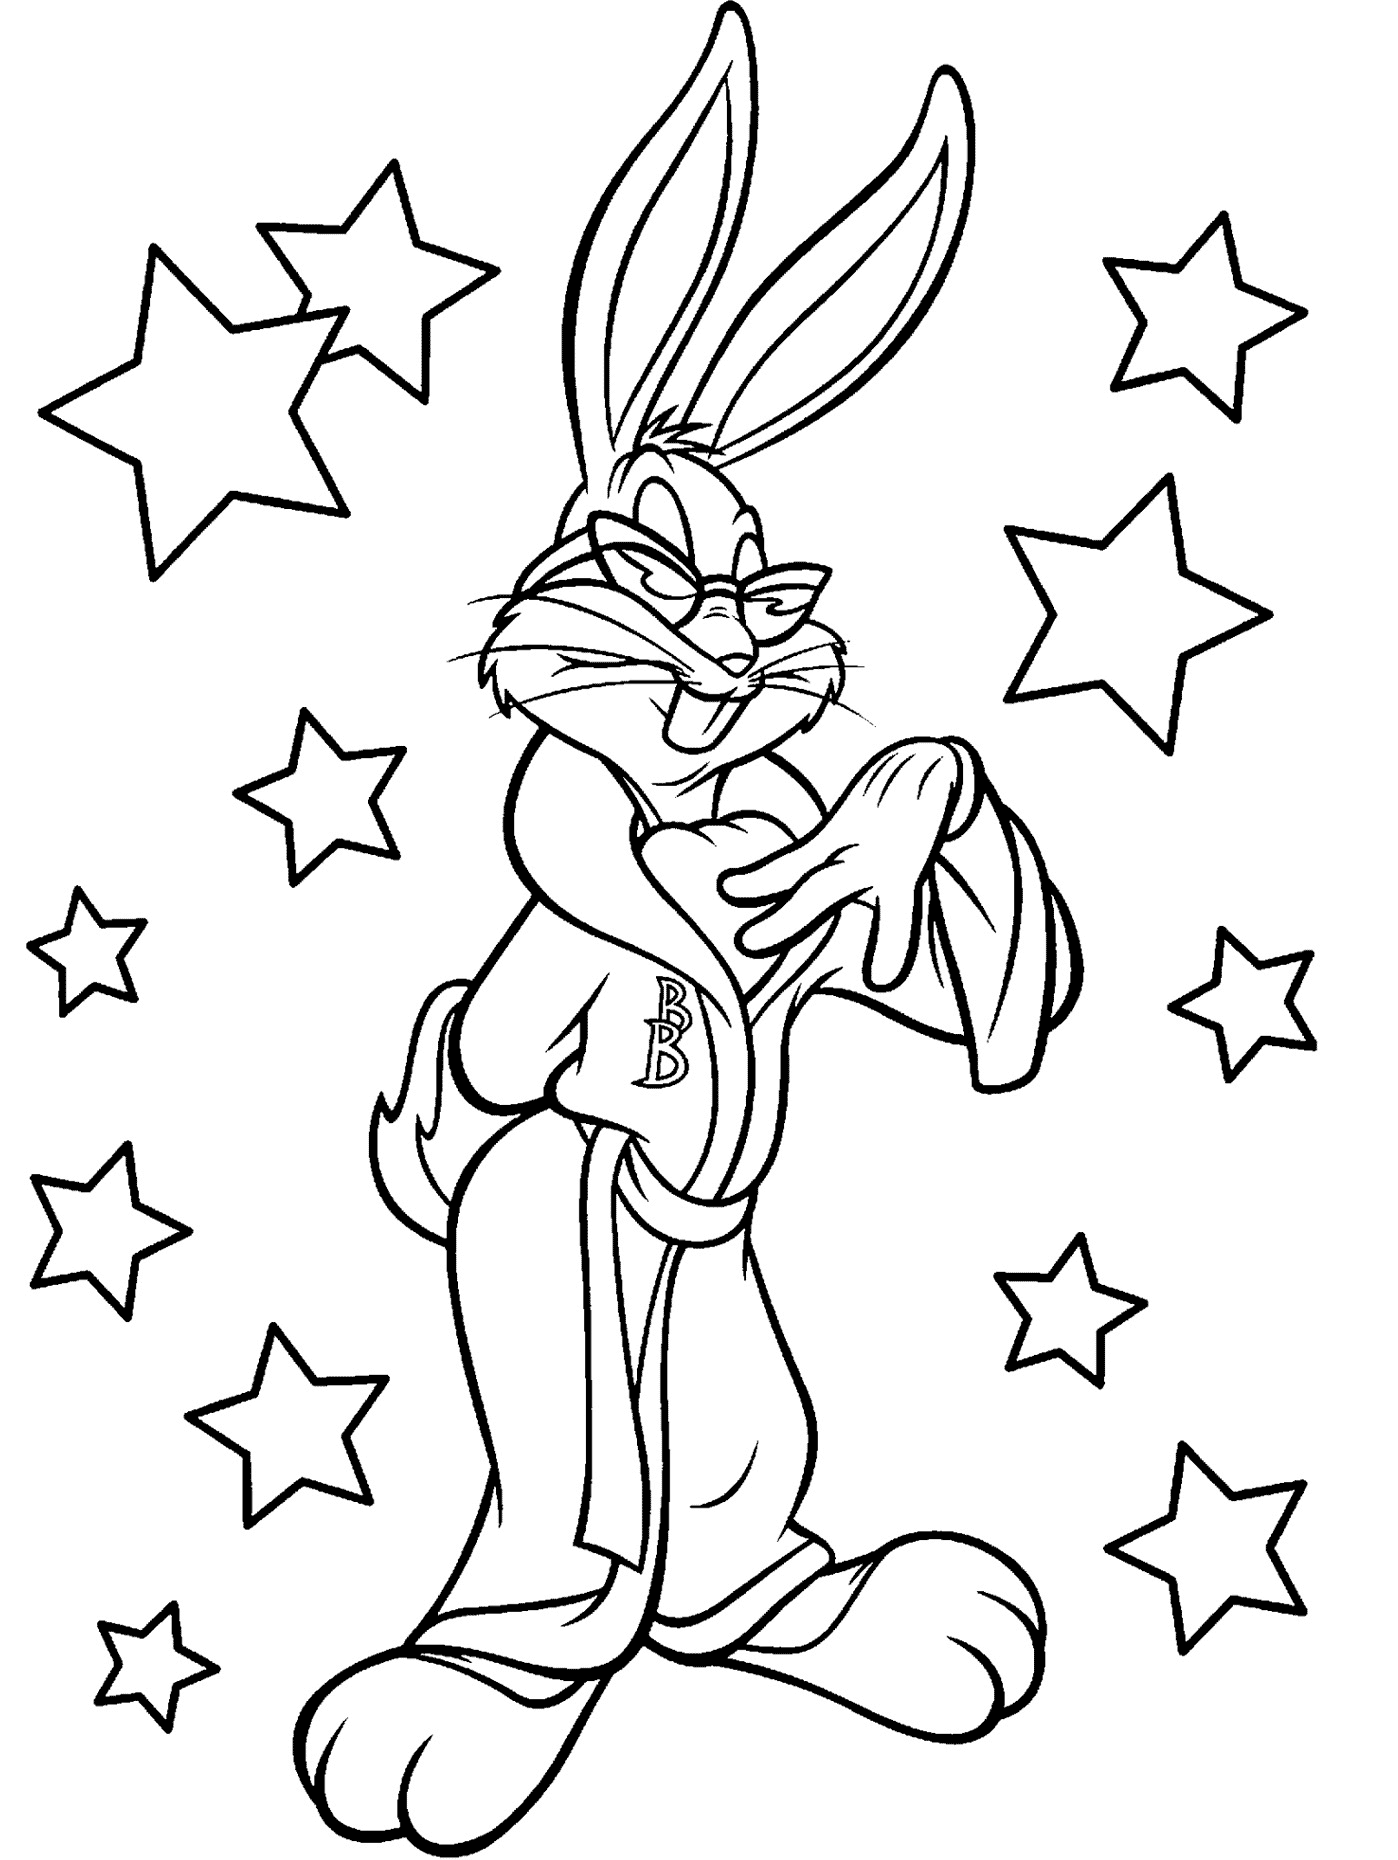 Bugs Bunny In Sunglasses Coloring Page